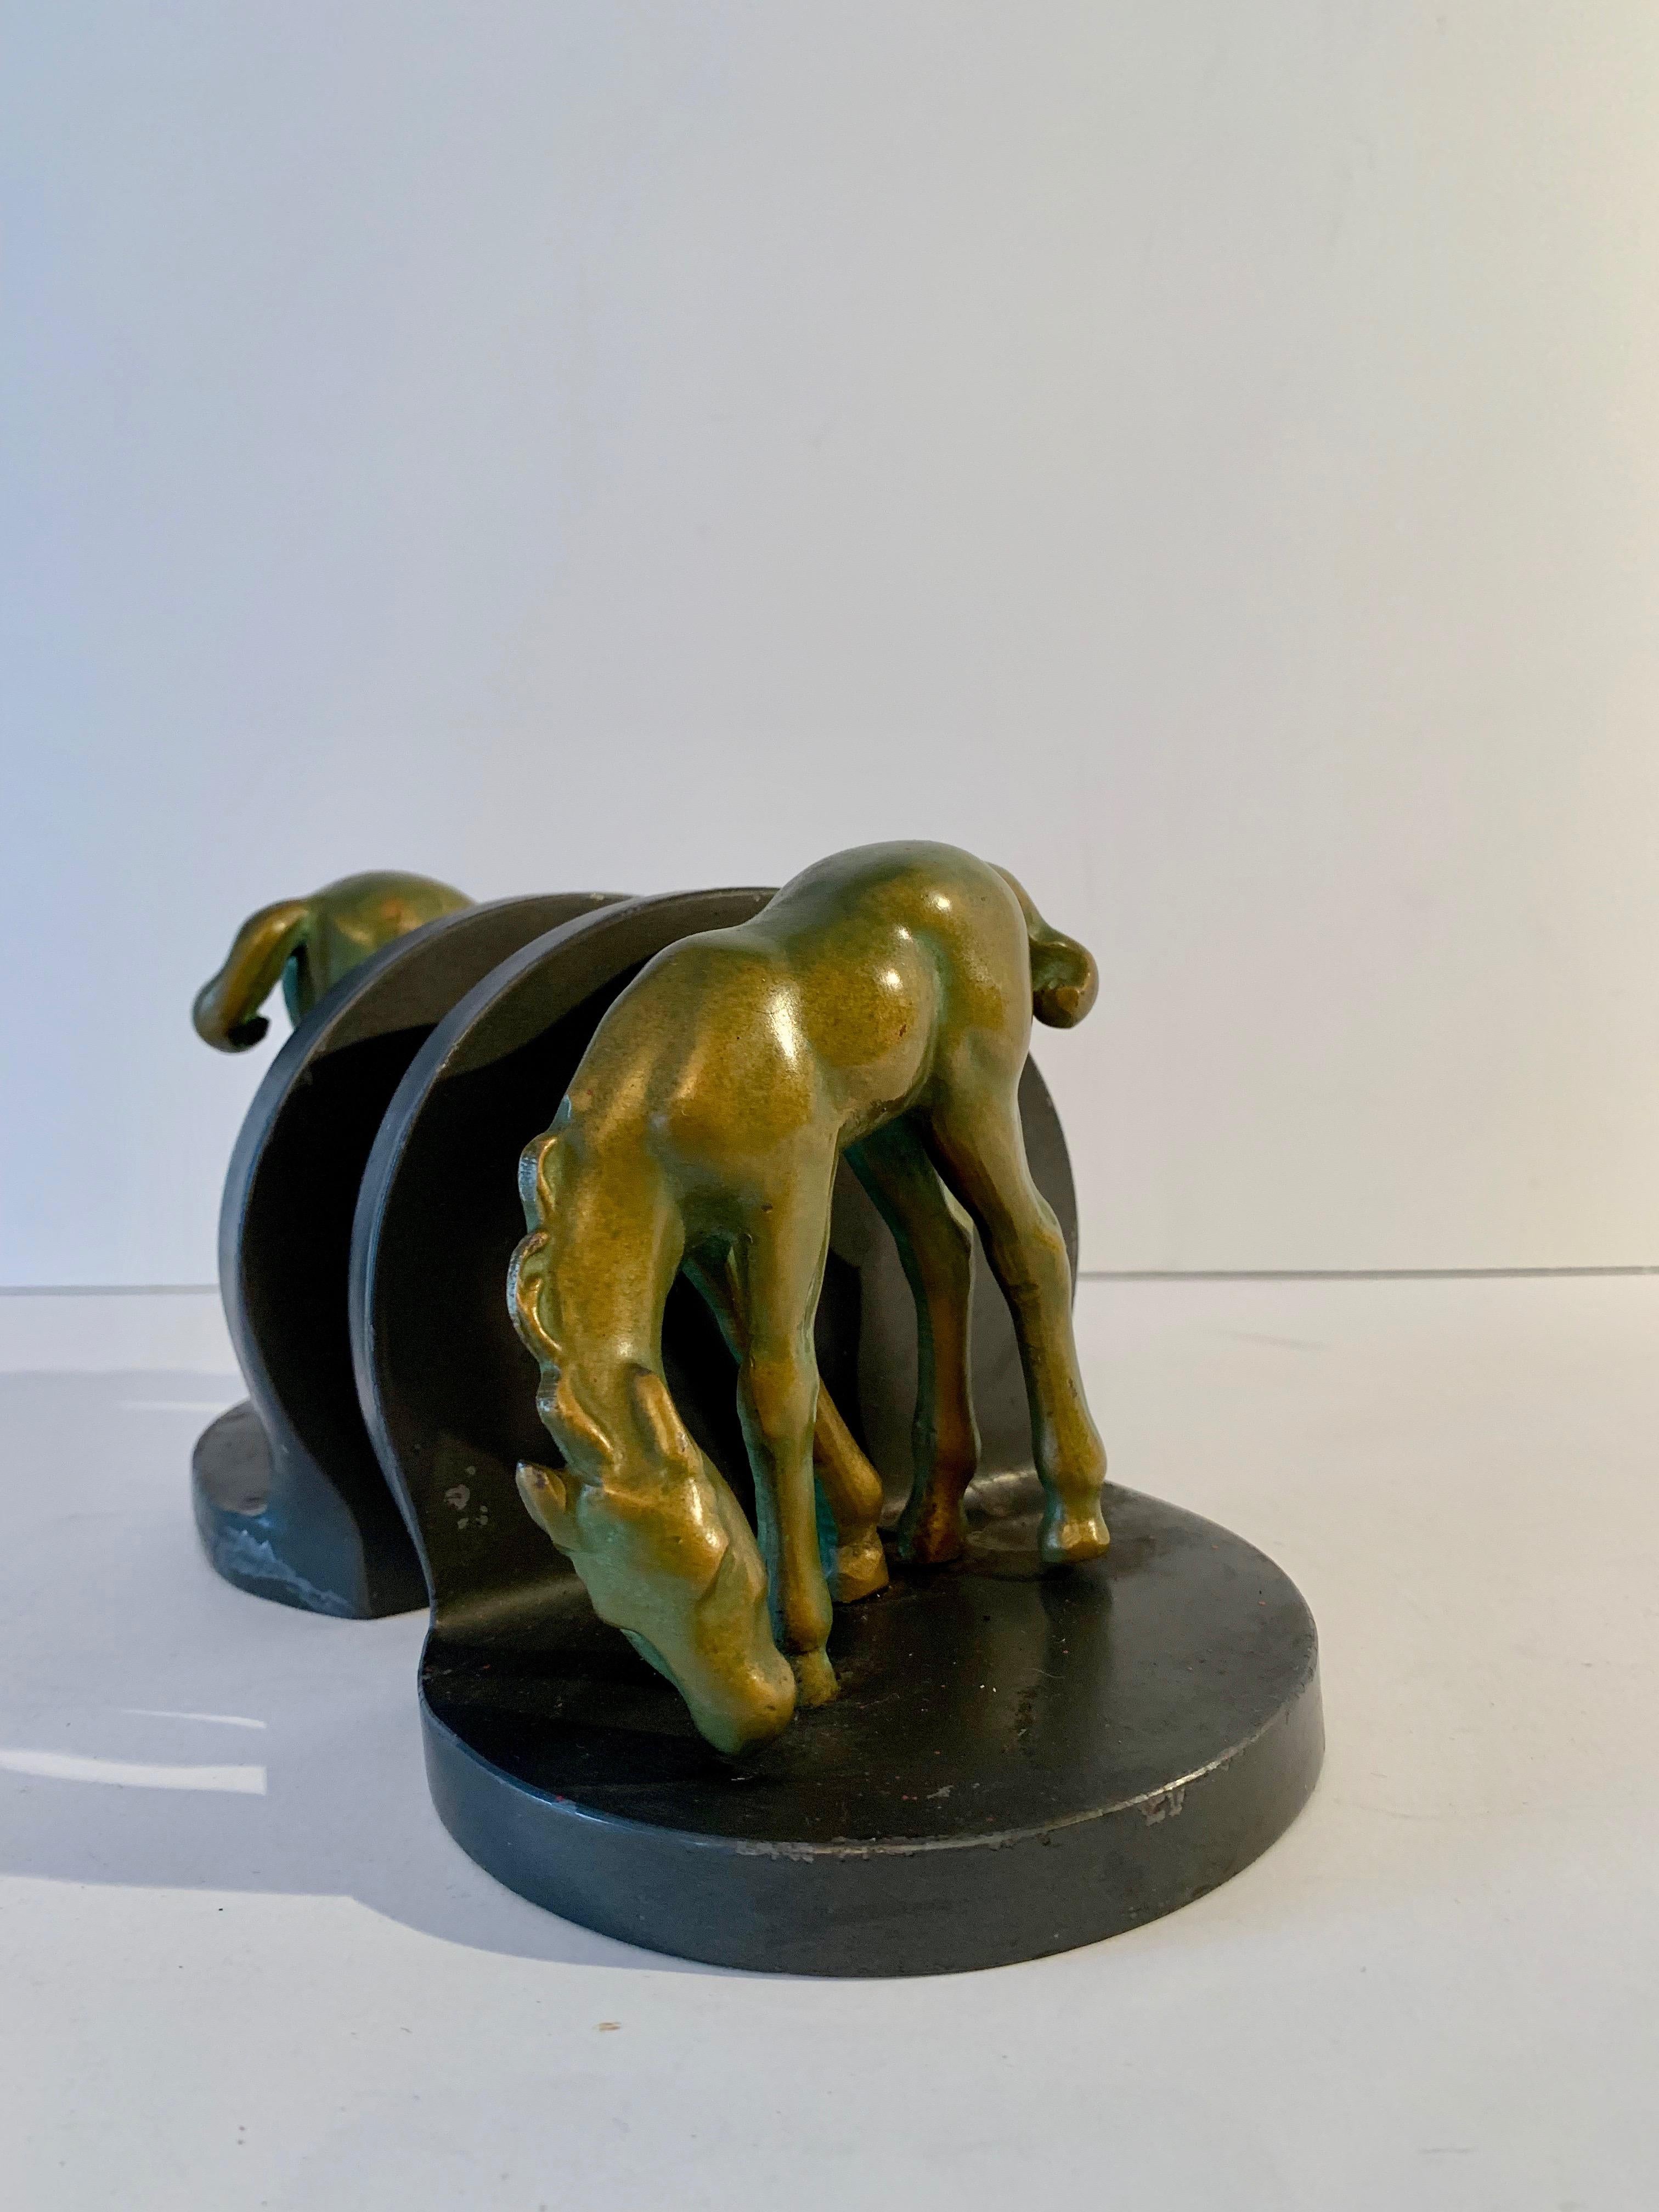 vintage brass horse bookends